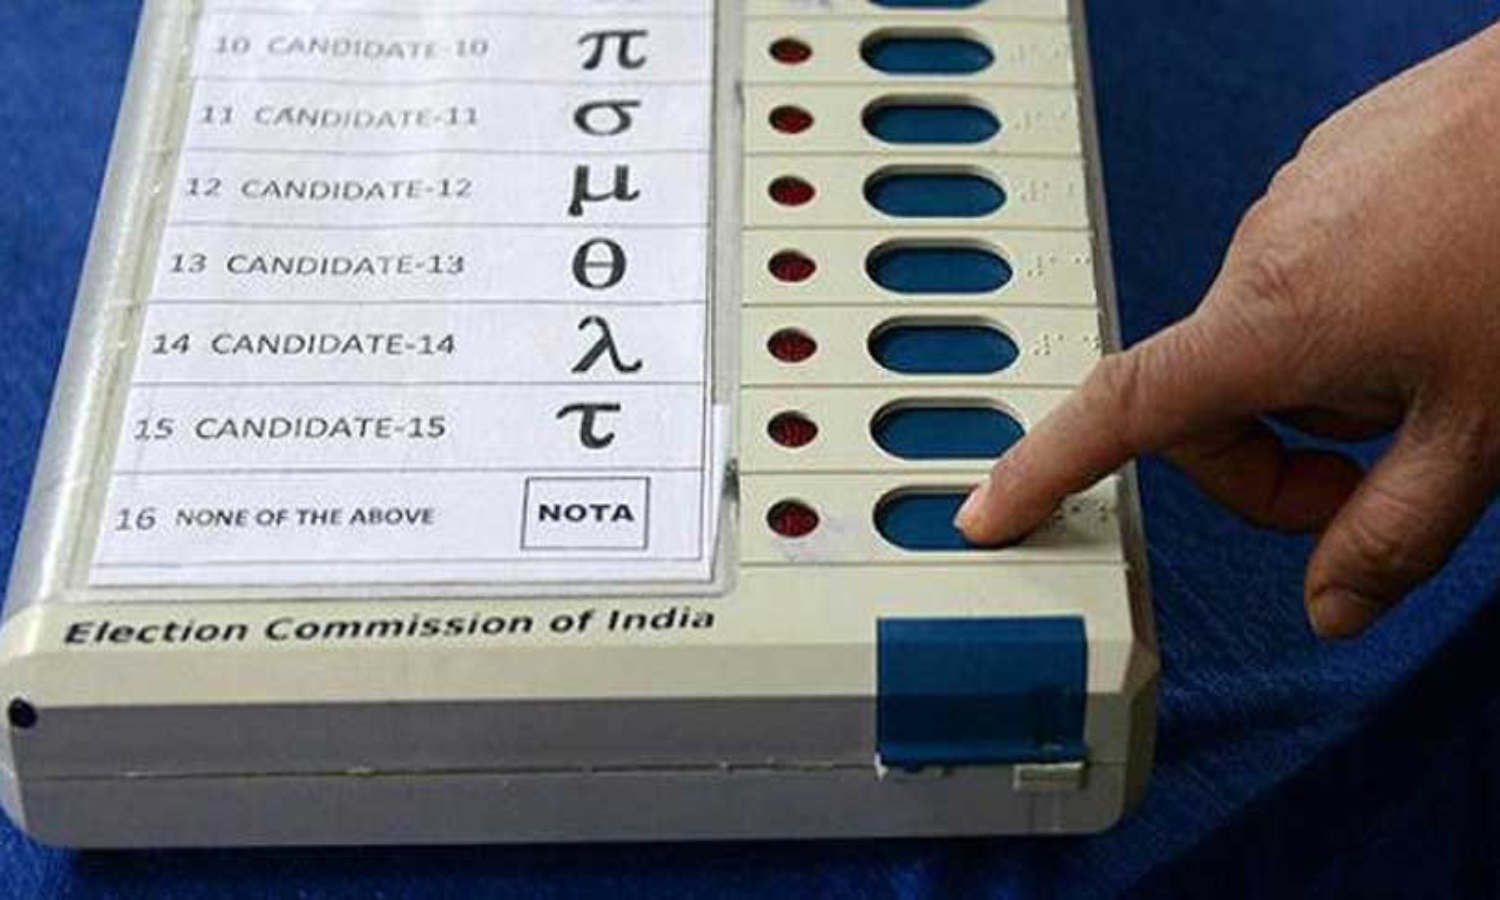 bjp-leader’s-minor-son-allegedly-casts-vote-probe-launched